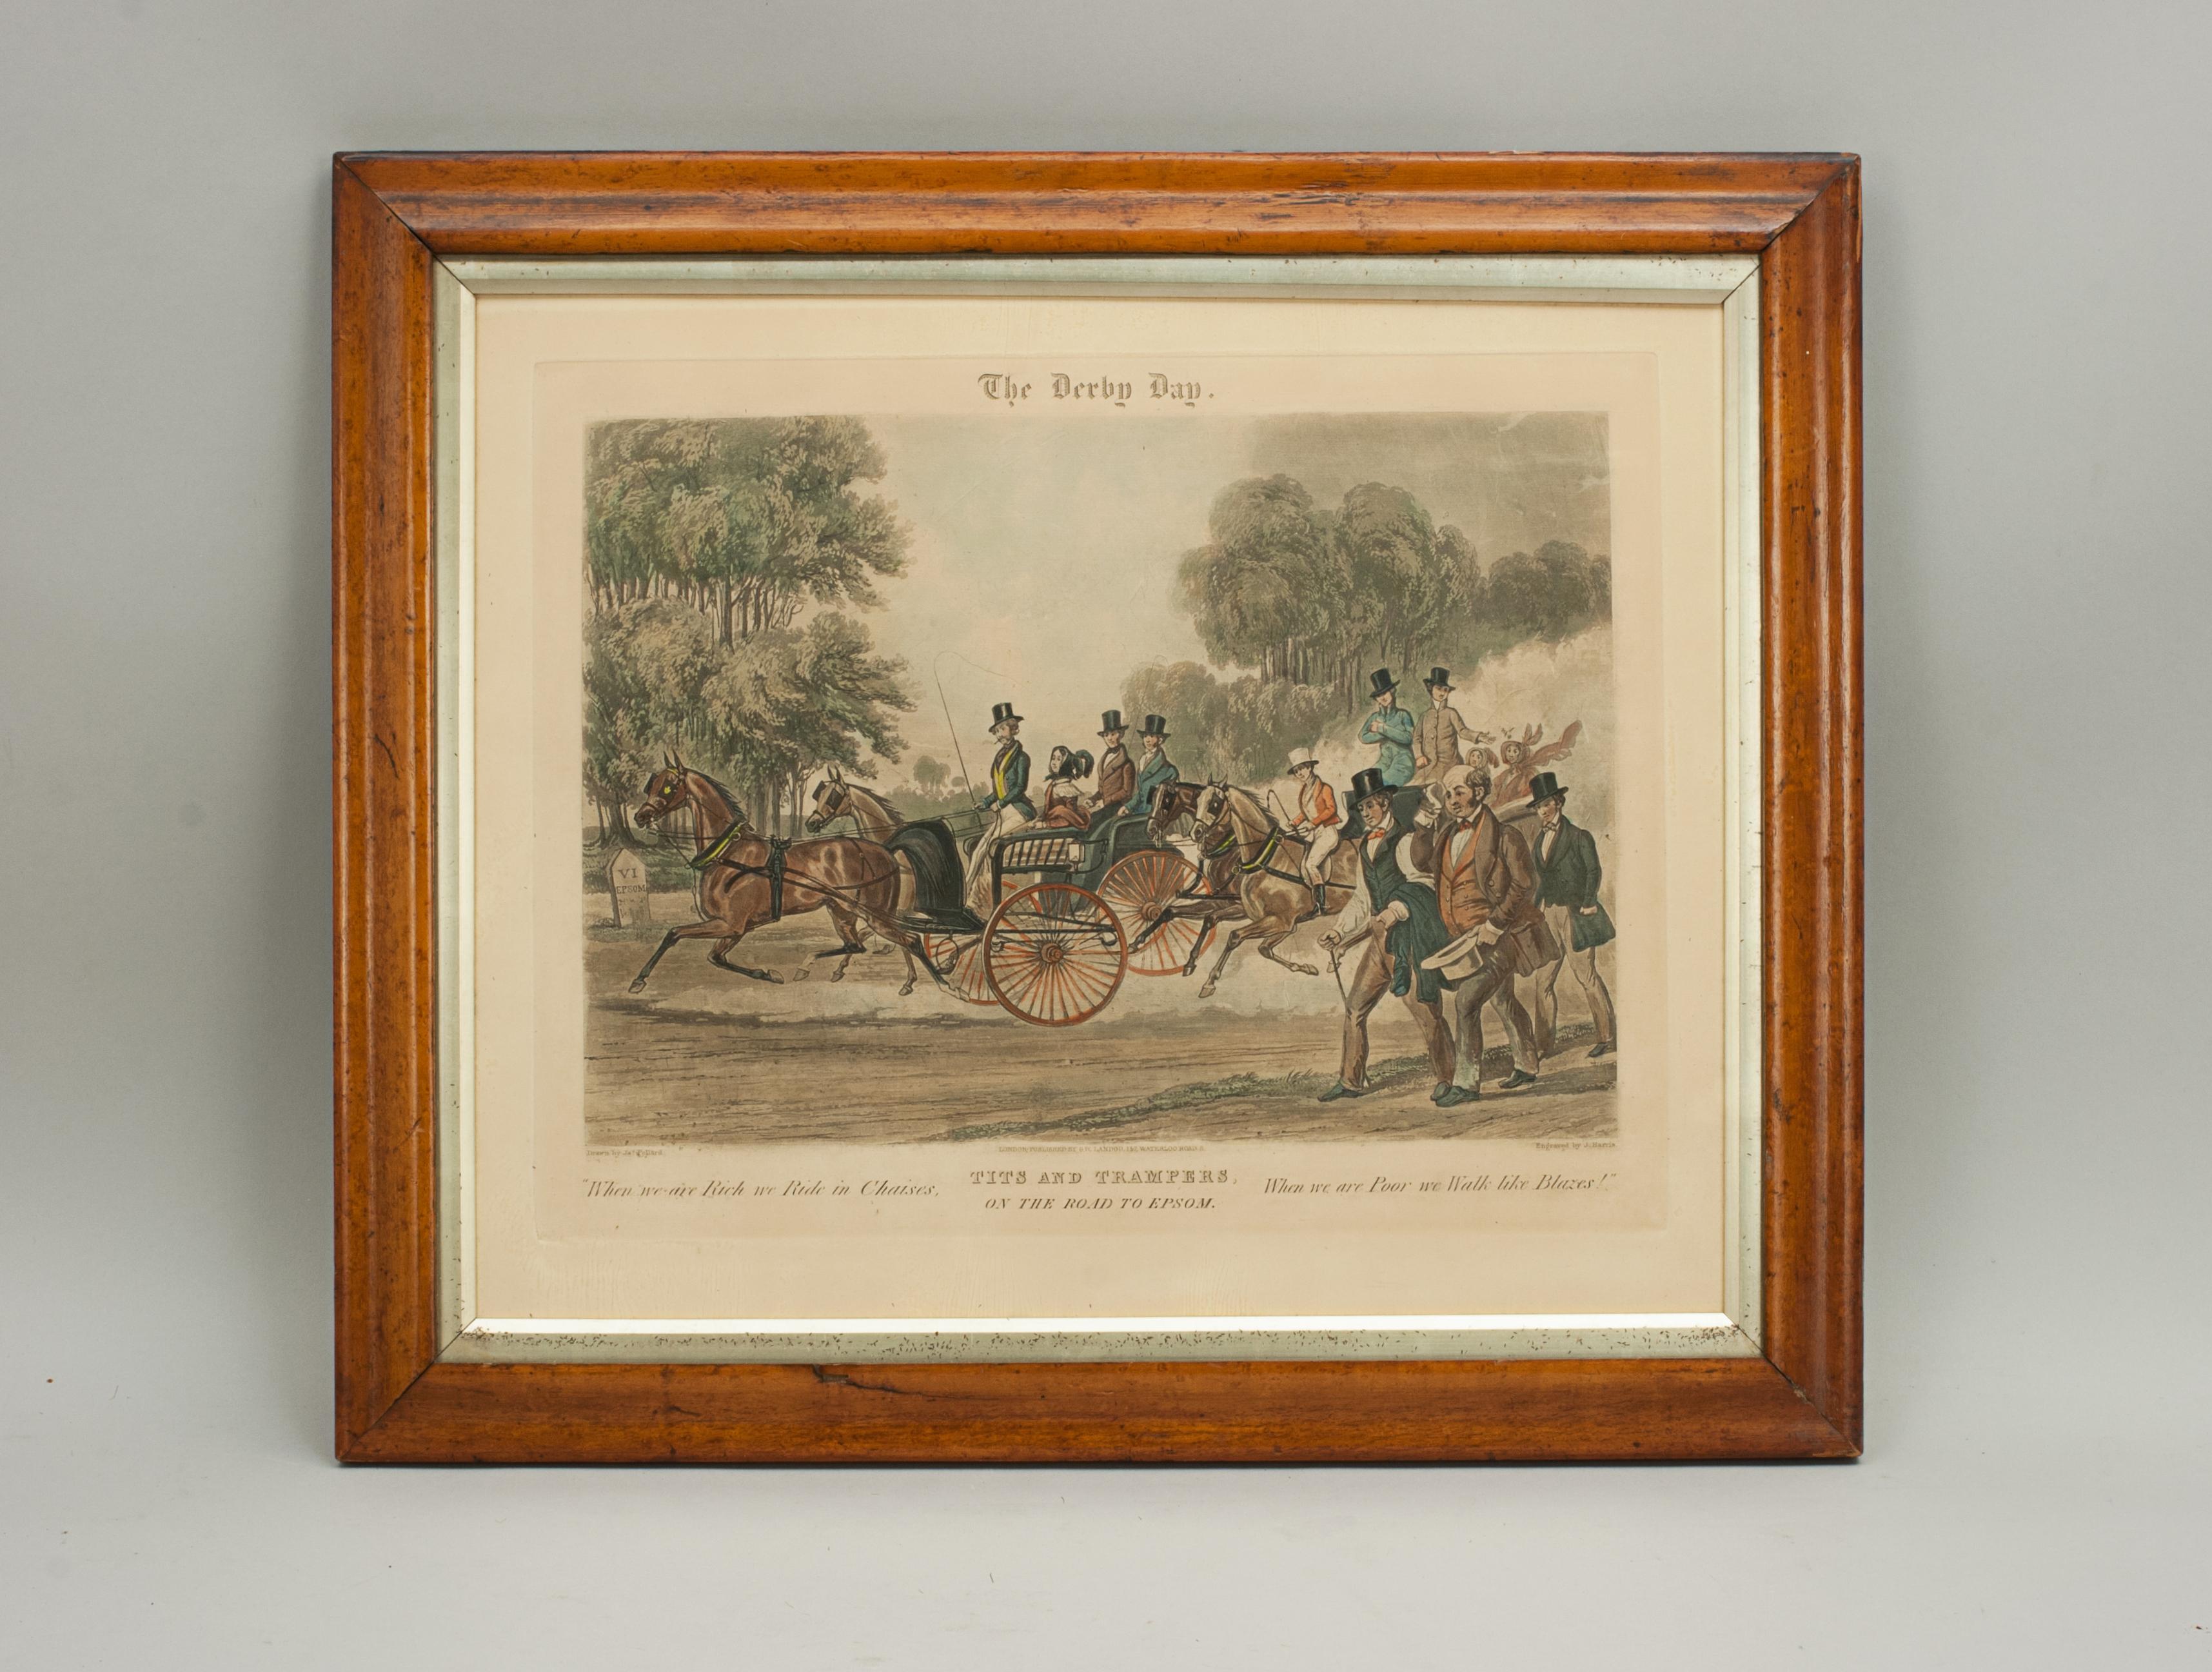 Coaching picture by James Pollard.
The Derby Day, Tits and Trampers, on the road to Epsom after the original by James Pollard. Framed in an old maple frame with gold slip and glass. The picture depicts people on the way to Epsom races with the